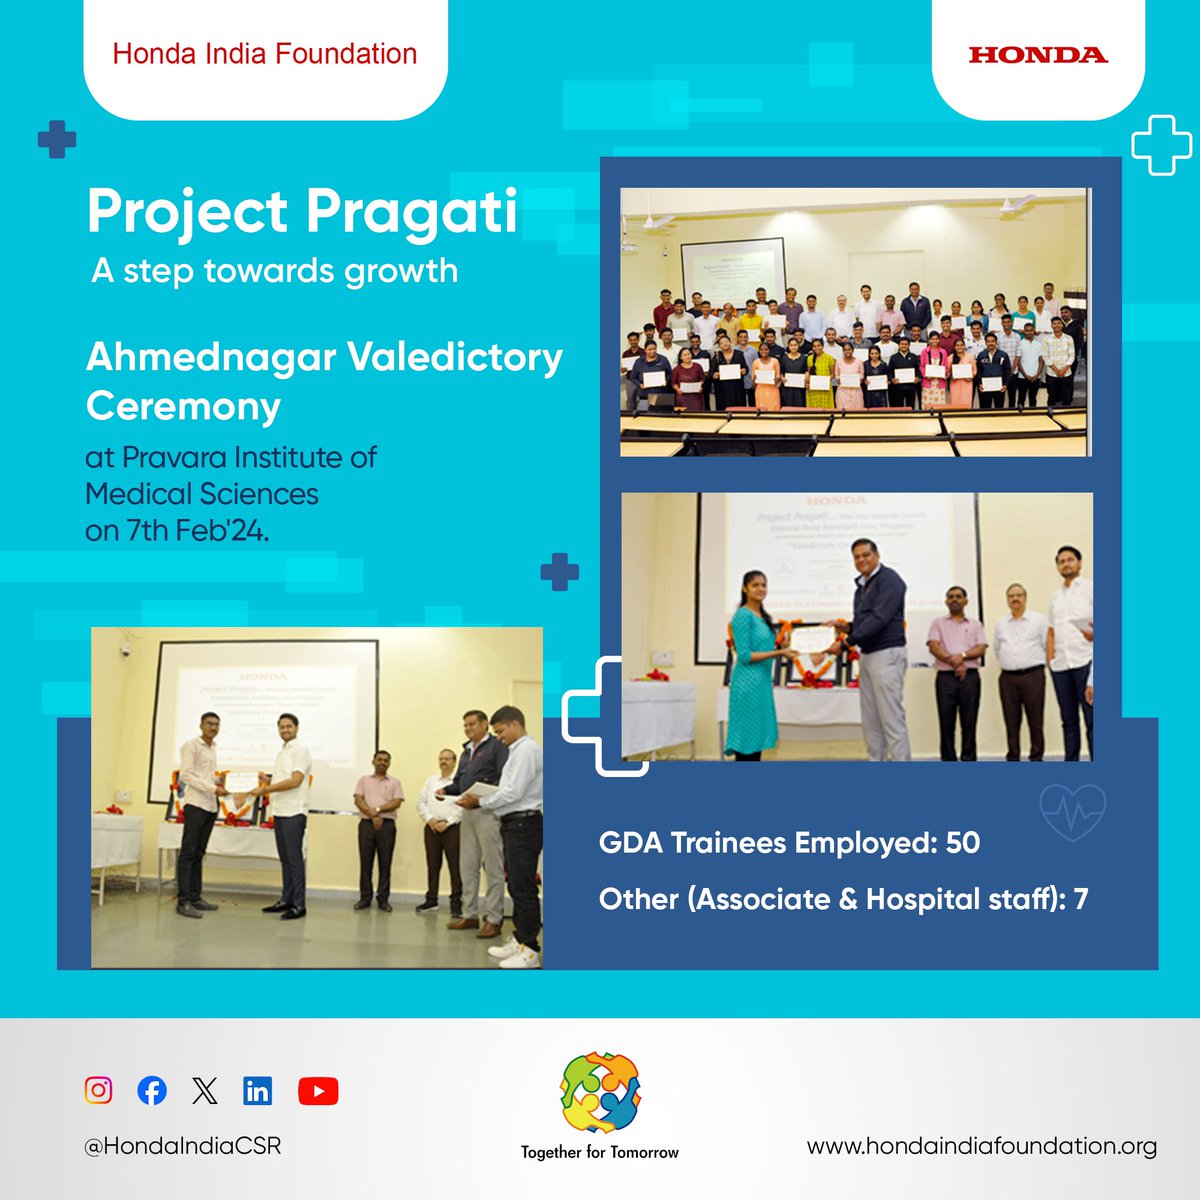 Over 295+ GDA trainees across these locations have got placed with reputed hospitals.

#HondaIndiaFoundation #HIF #CSR #RuralDevelopment #HealthCare #RuralHealthcare #ProjectPragati #RuralYouth #SkillEnhacement #SkillIndia #SkillDevelopment #Honda